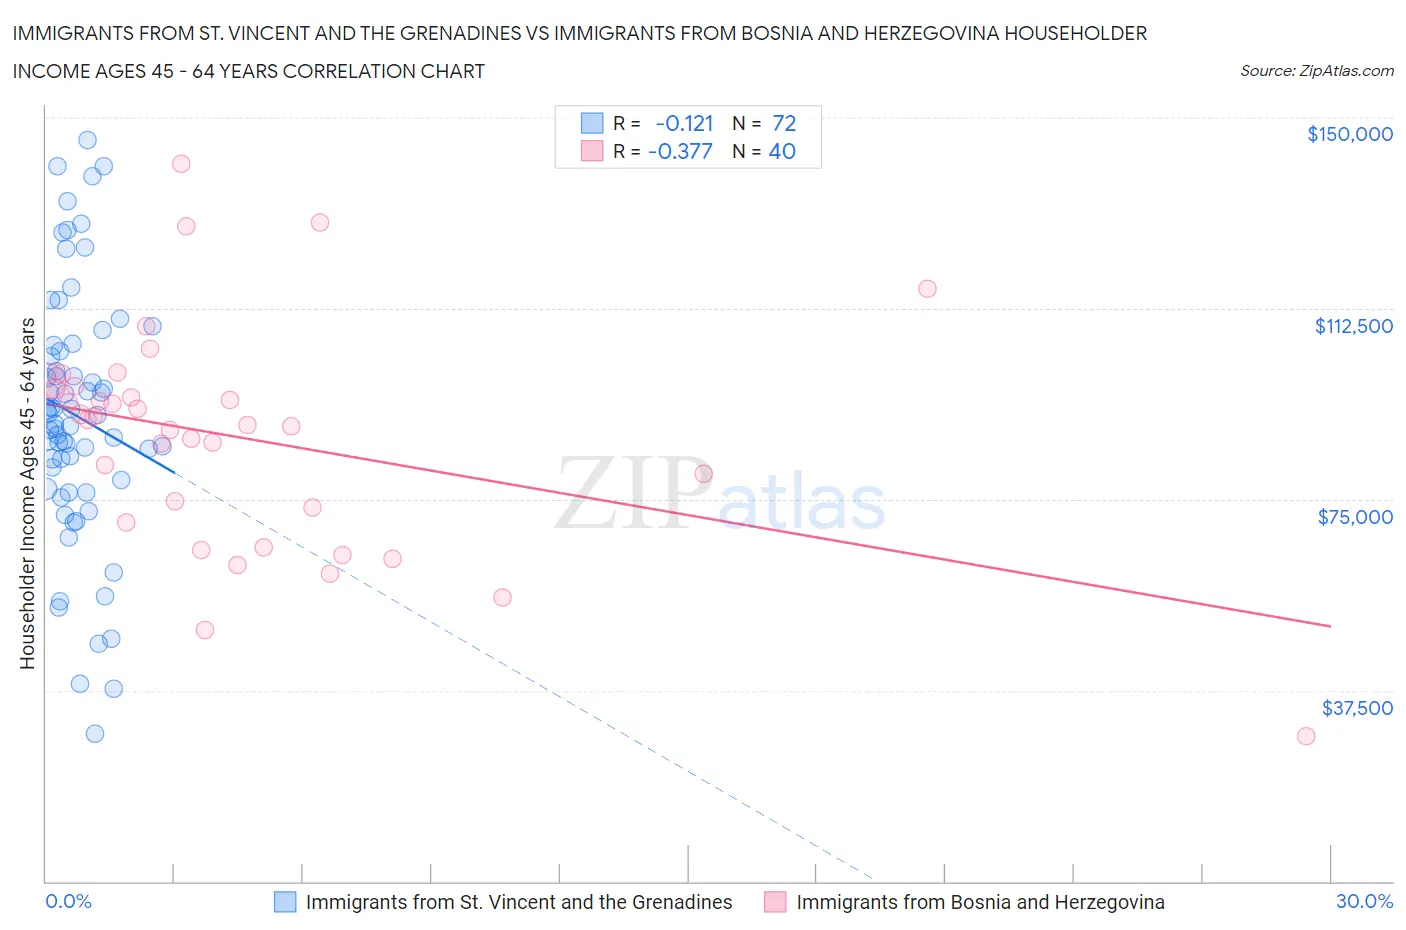 Immigrants from St. Vincent and the Grenadines vs Immigrants from Bosnia and Herzegovina Householder Income Ages 45 - 64 years